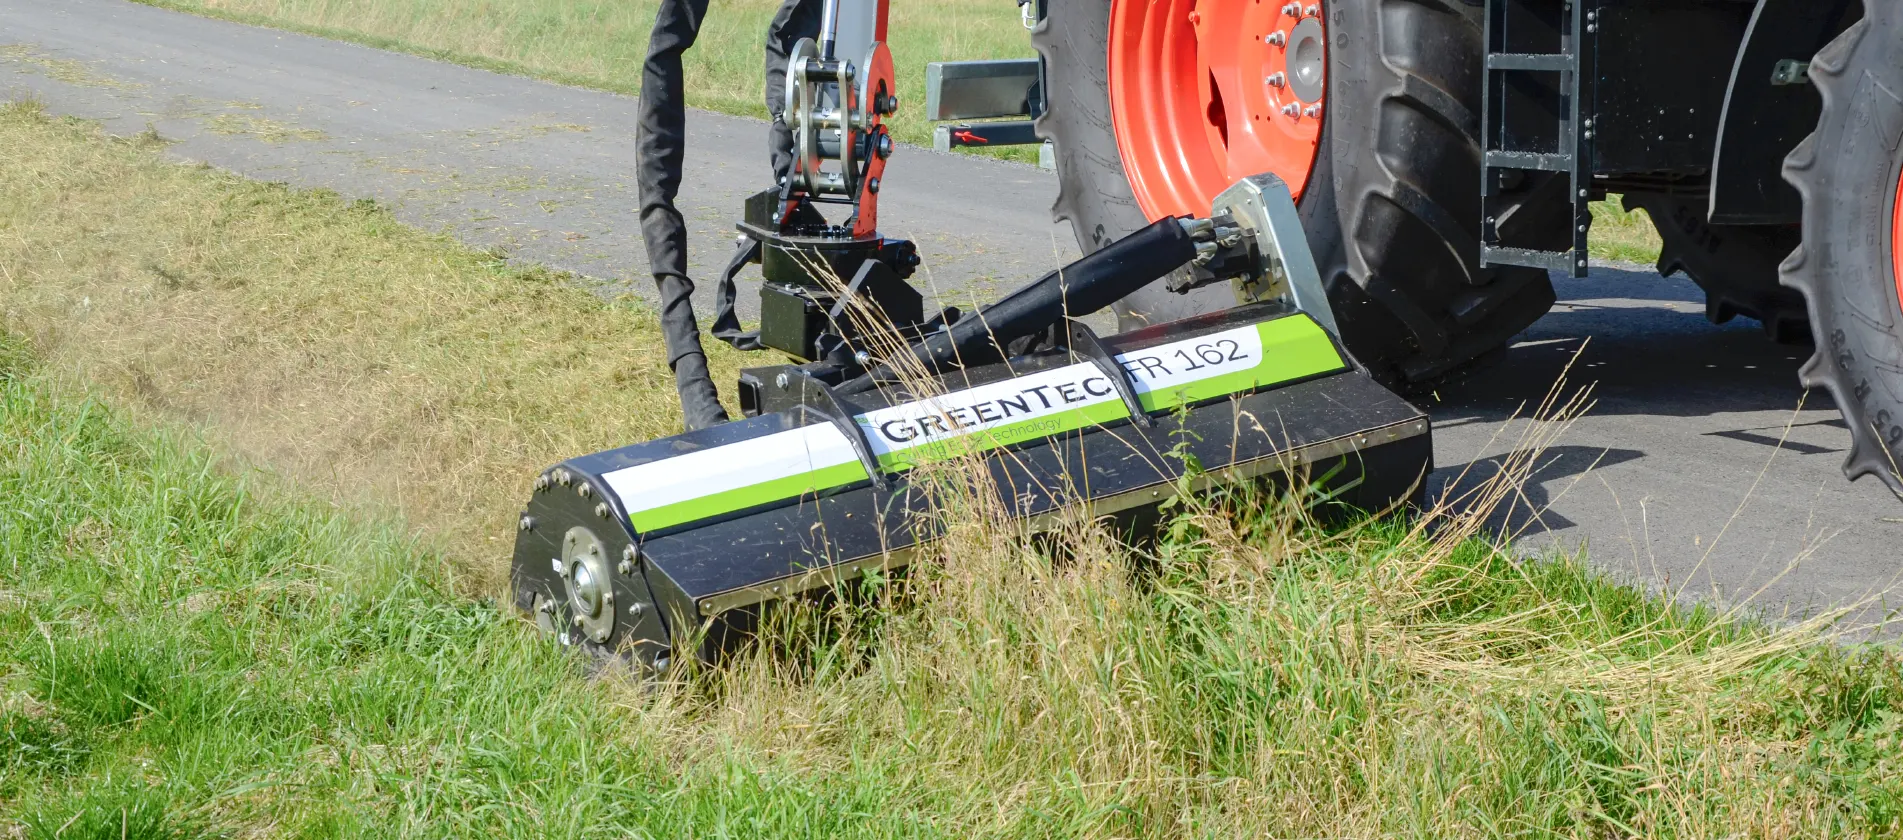 Hydraulic flail mower for maintenance of grass and shrubs